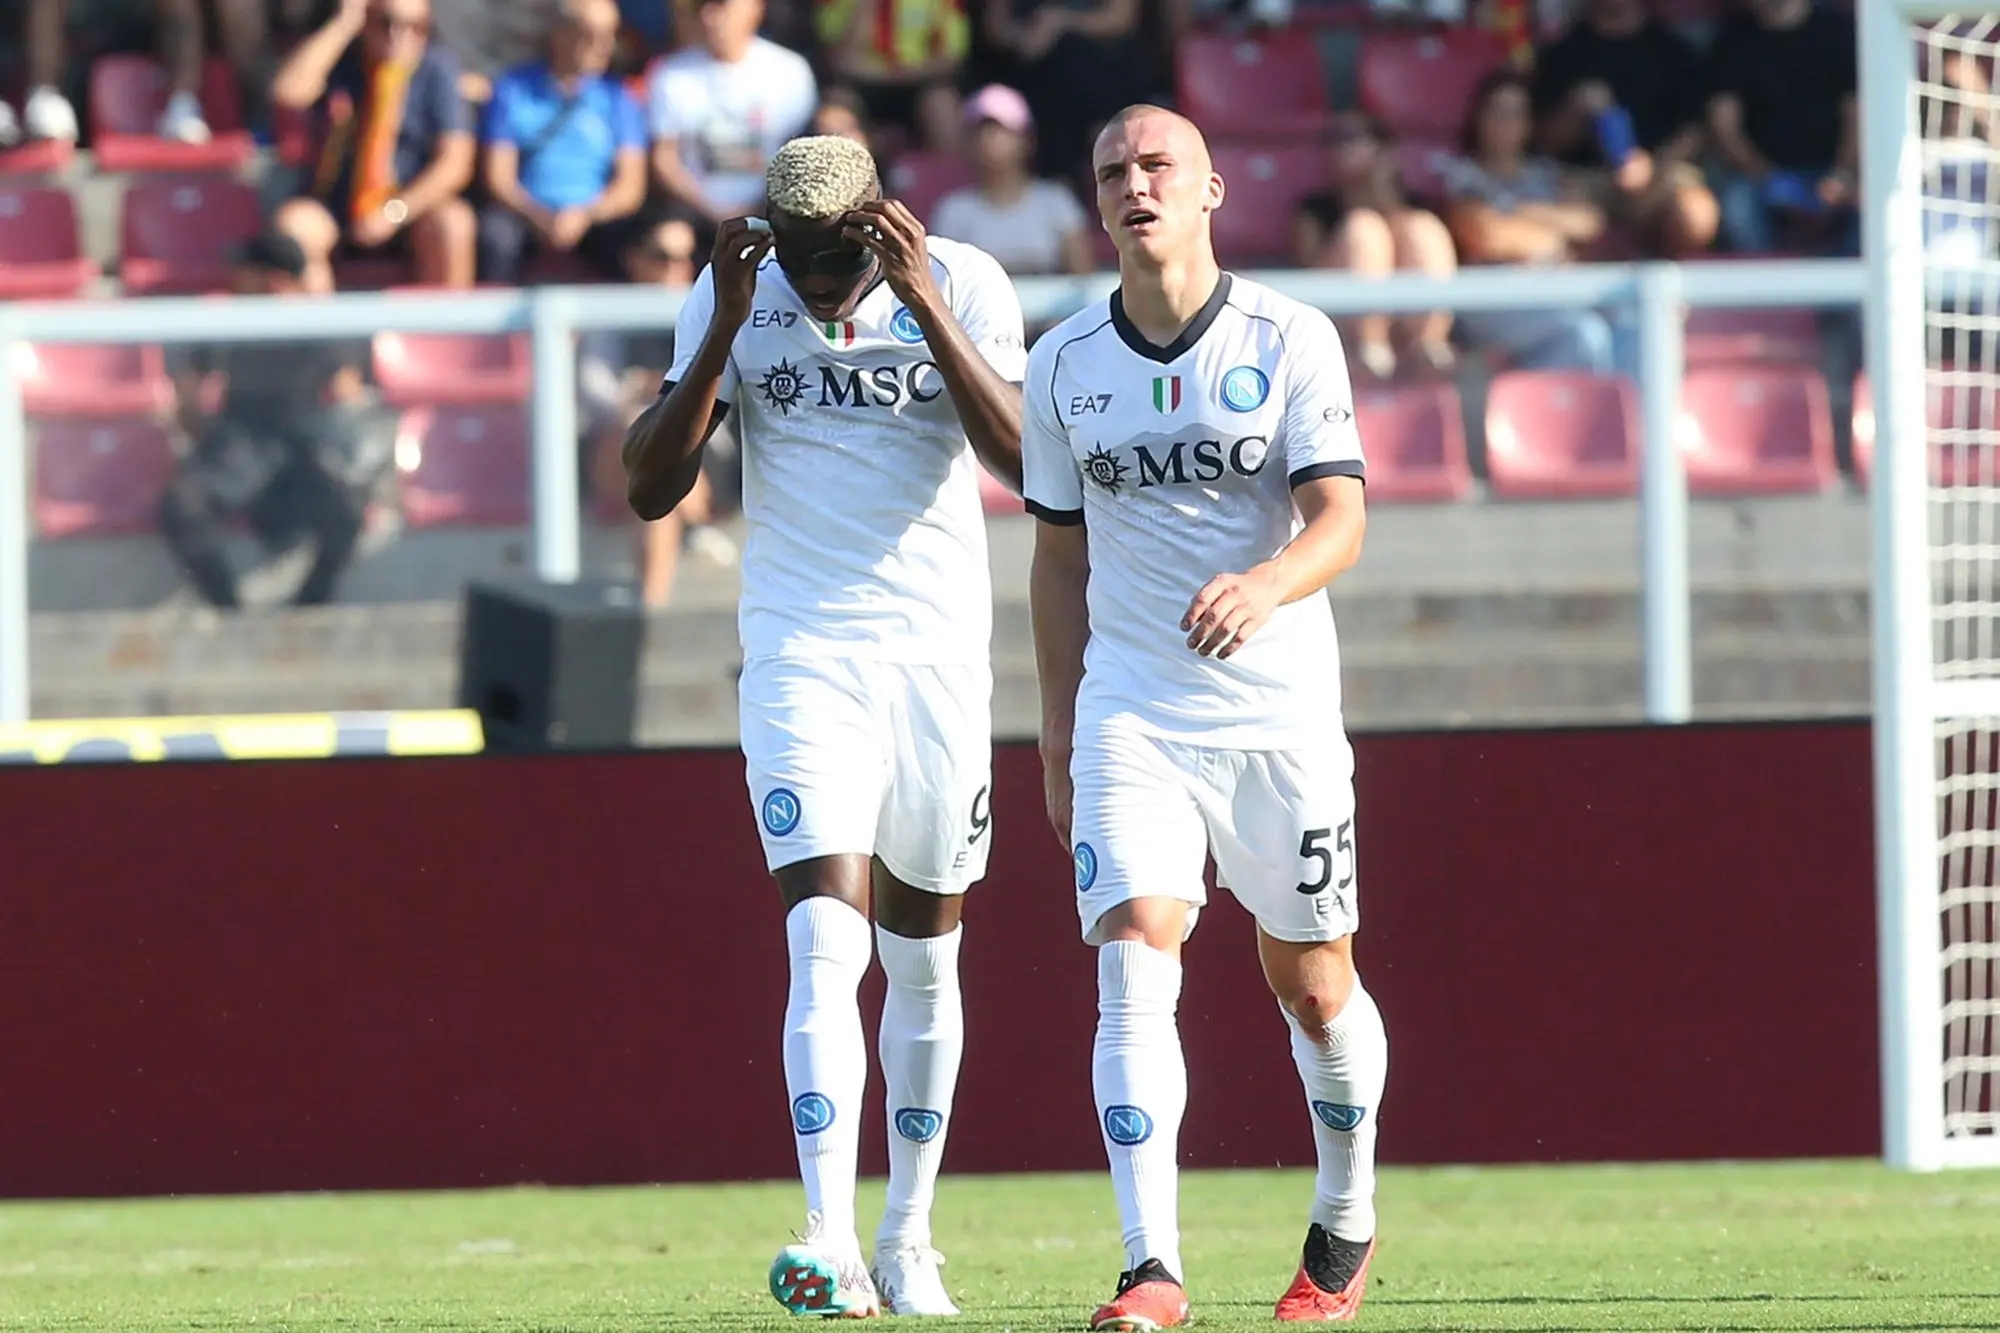 SSC Napoli's Osimhen after scoring the goal during the Italian Serie A soccer match US Lecce - SSC Napoli at the Via del Mare stadium in Lecce, Italy, 30 september 2023. ANSA/ABBONDANZA SCURO LEZZI